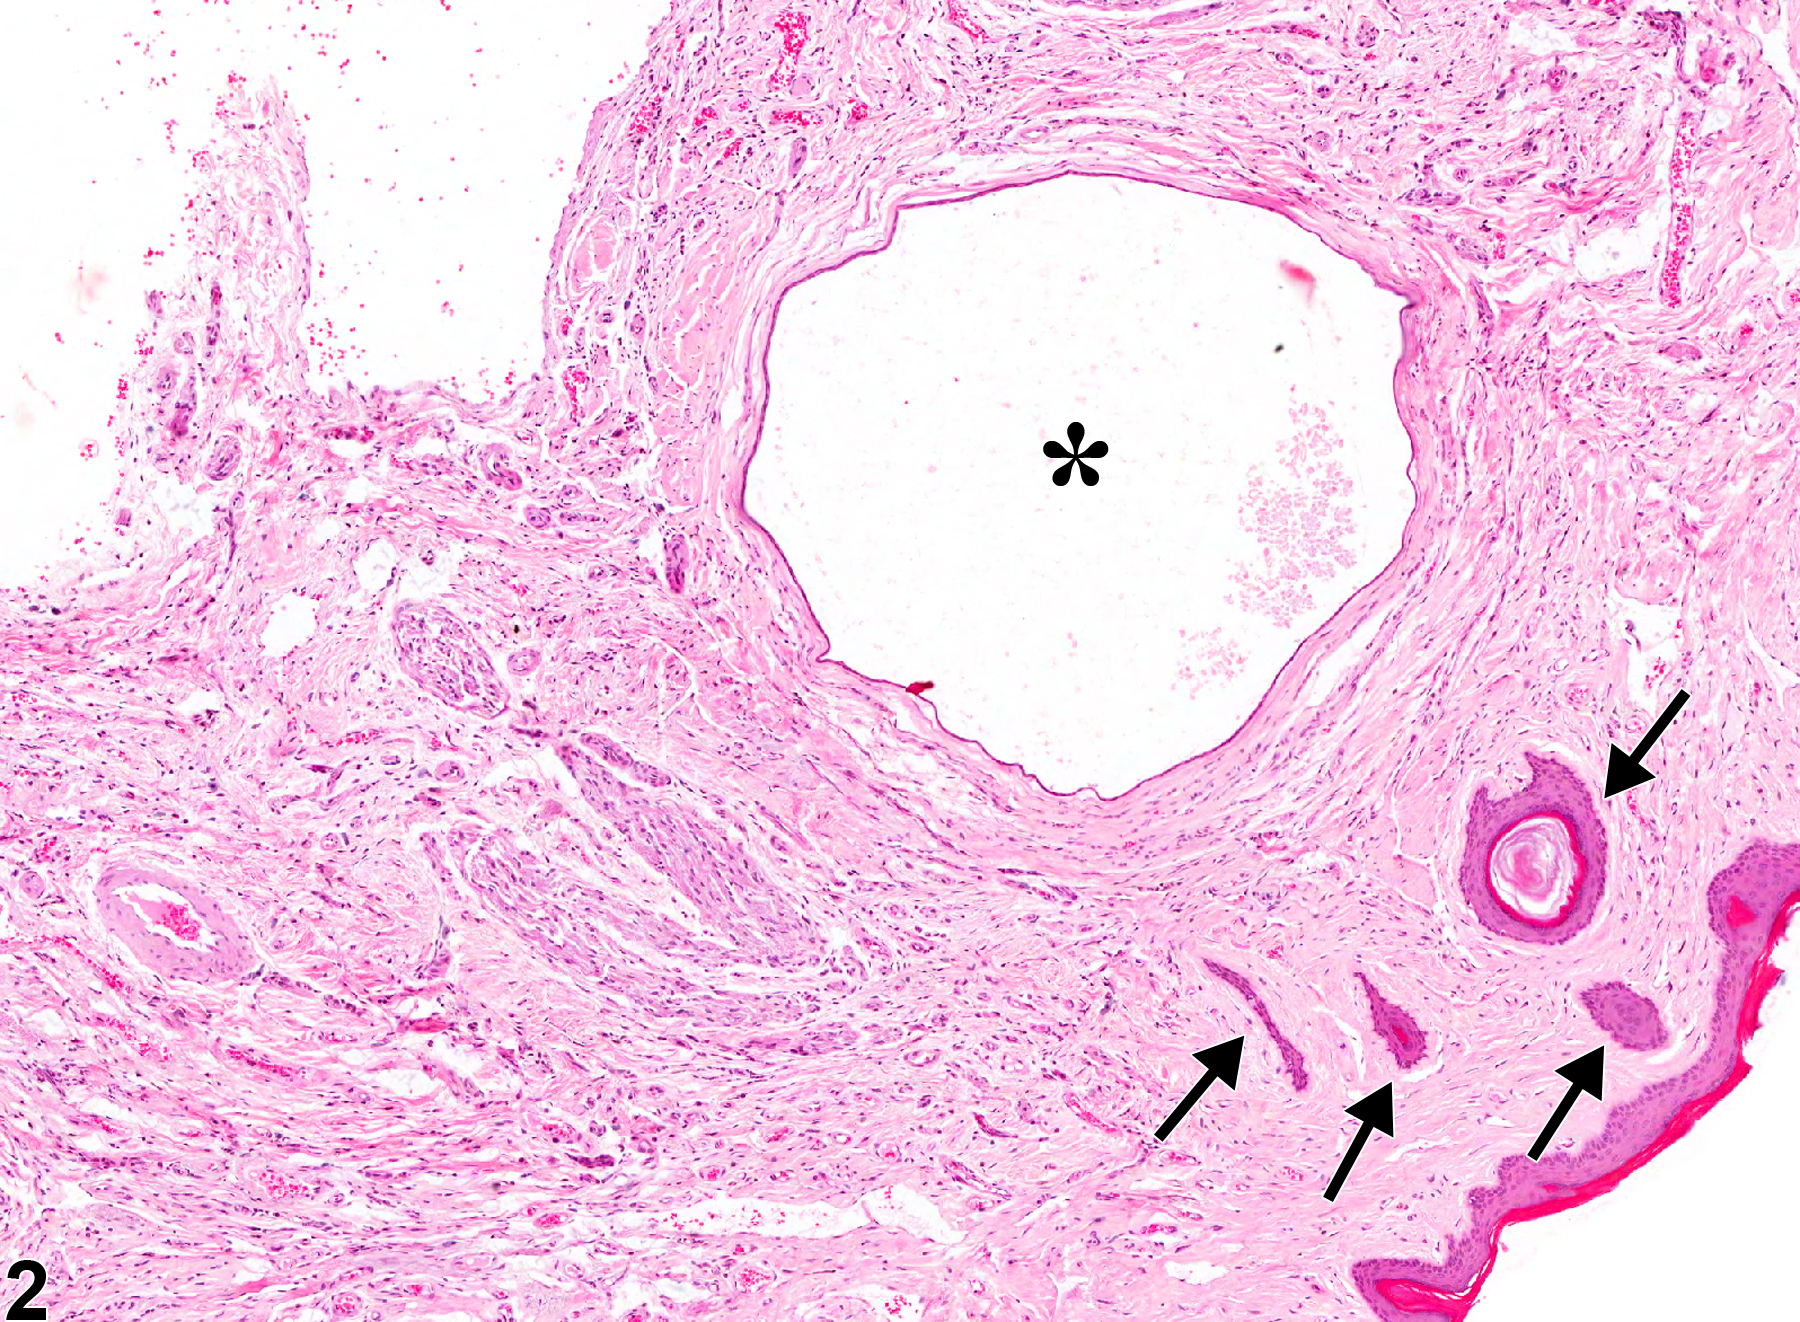 Image of fibrosis in the penis from a male B6C3F1 mouse in a chronic study